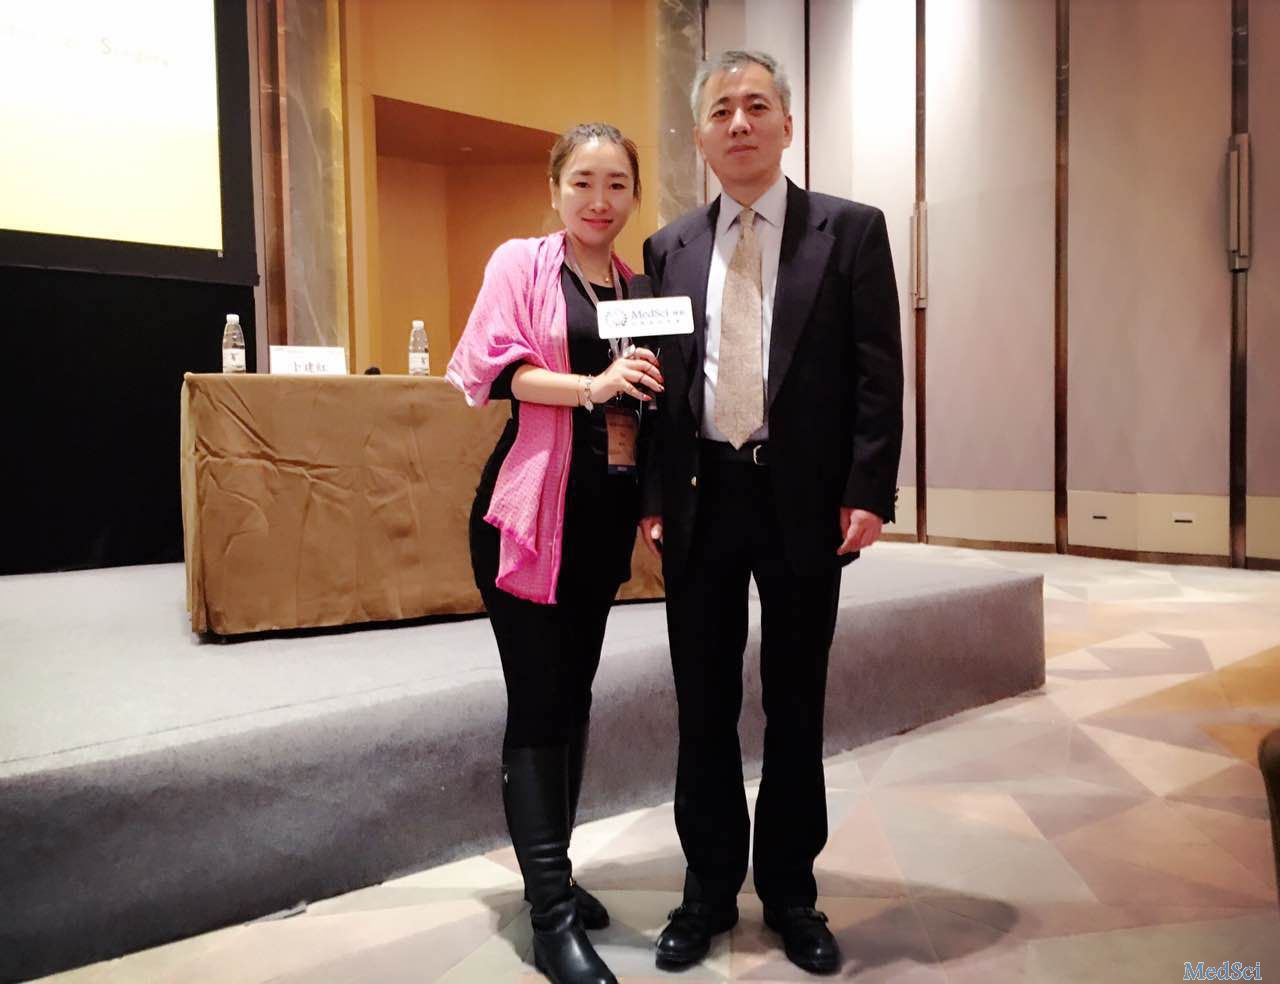 Medsci-World Congress of Endoscopic <font color="red">Surgery</font> kicks off in Shanghai